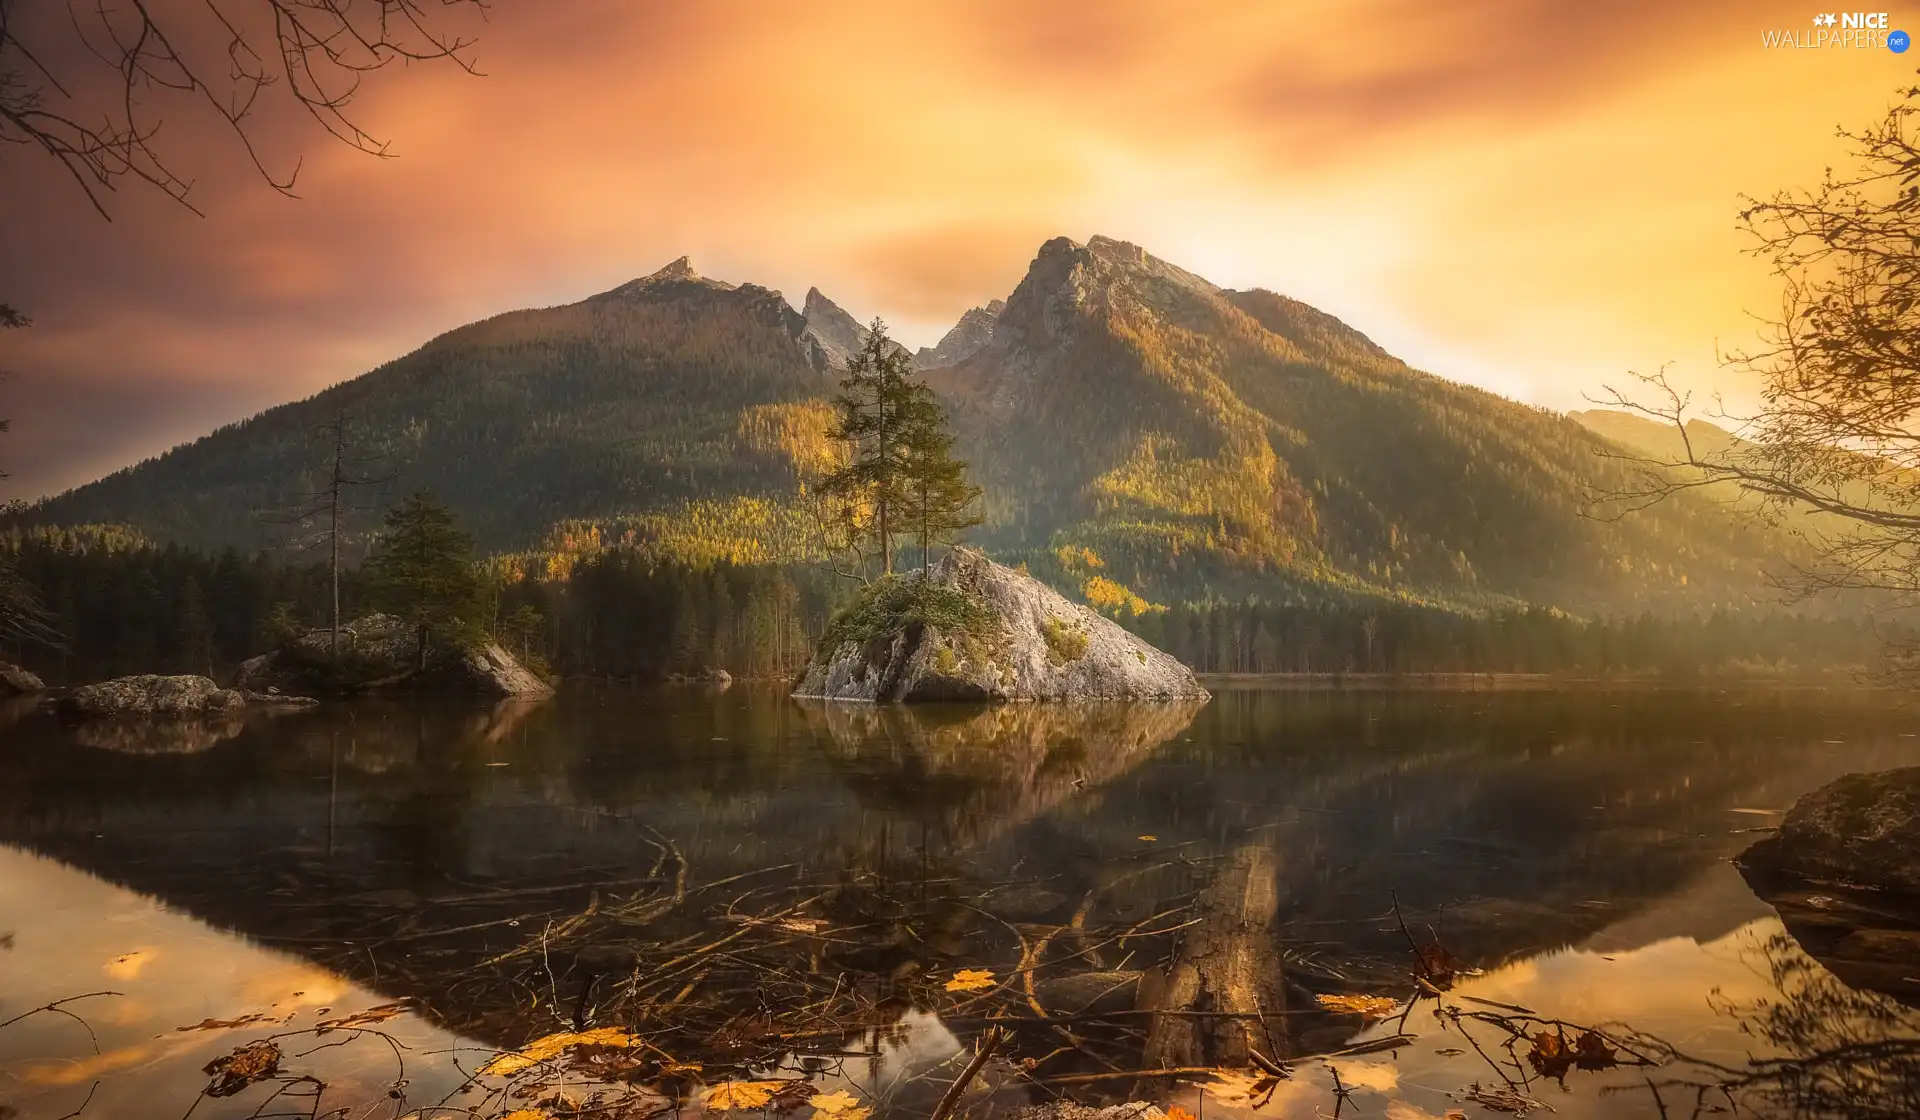 trees, viewes, Germany, Alps Mountains, Bavaria, rocks, Lake Hintersee, Great Sunsets